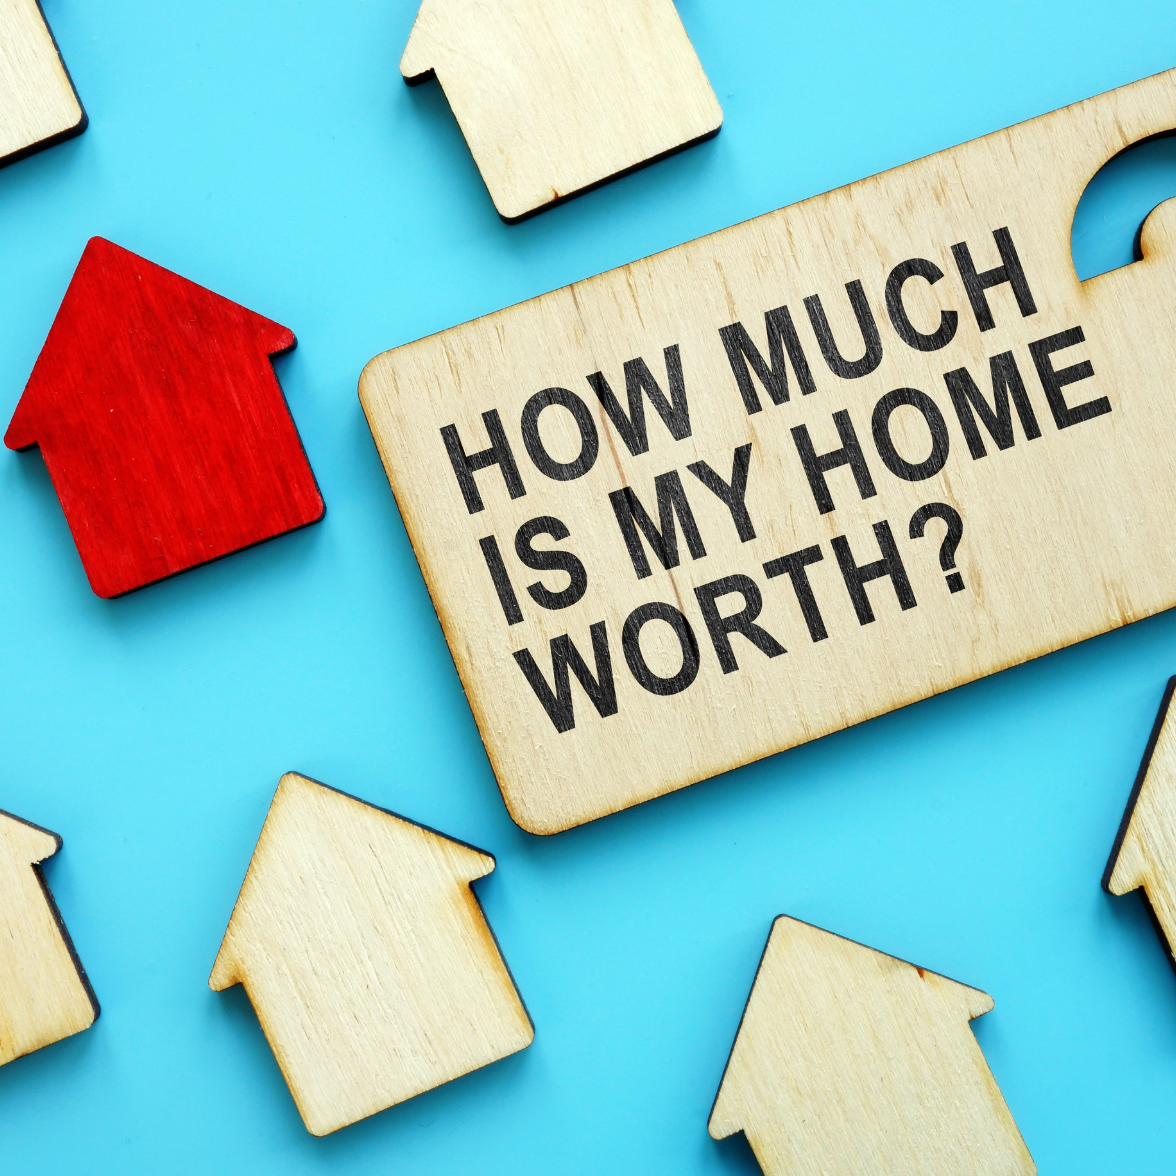 How much is my home worth